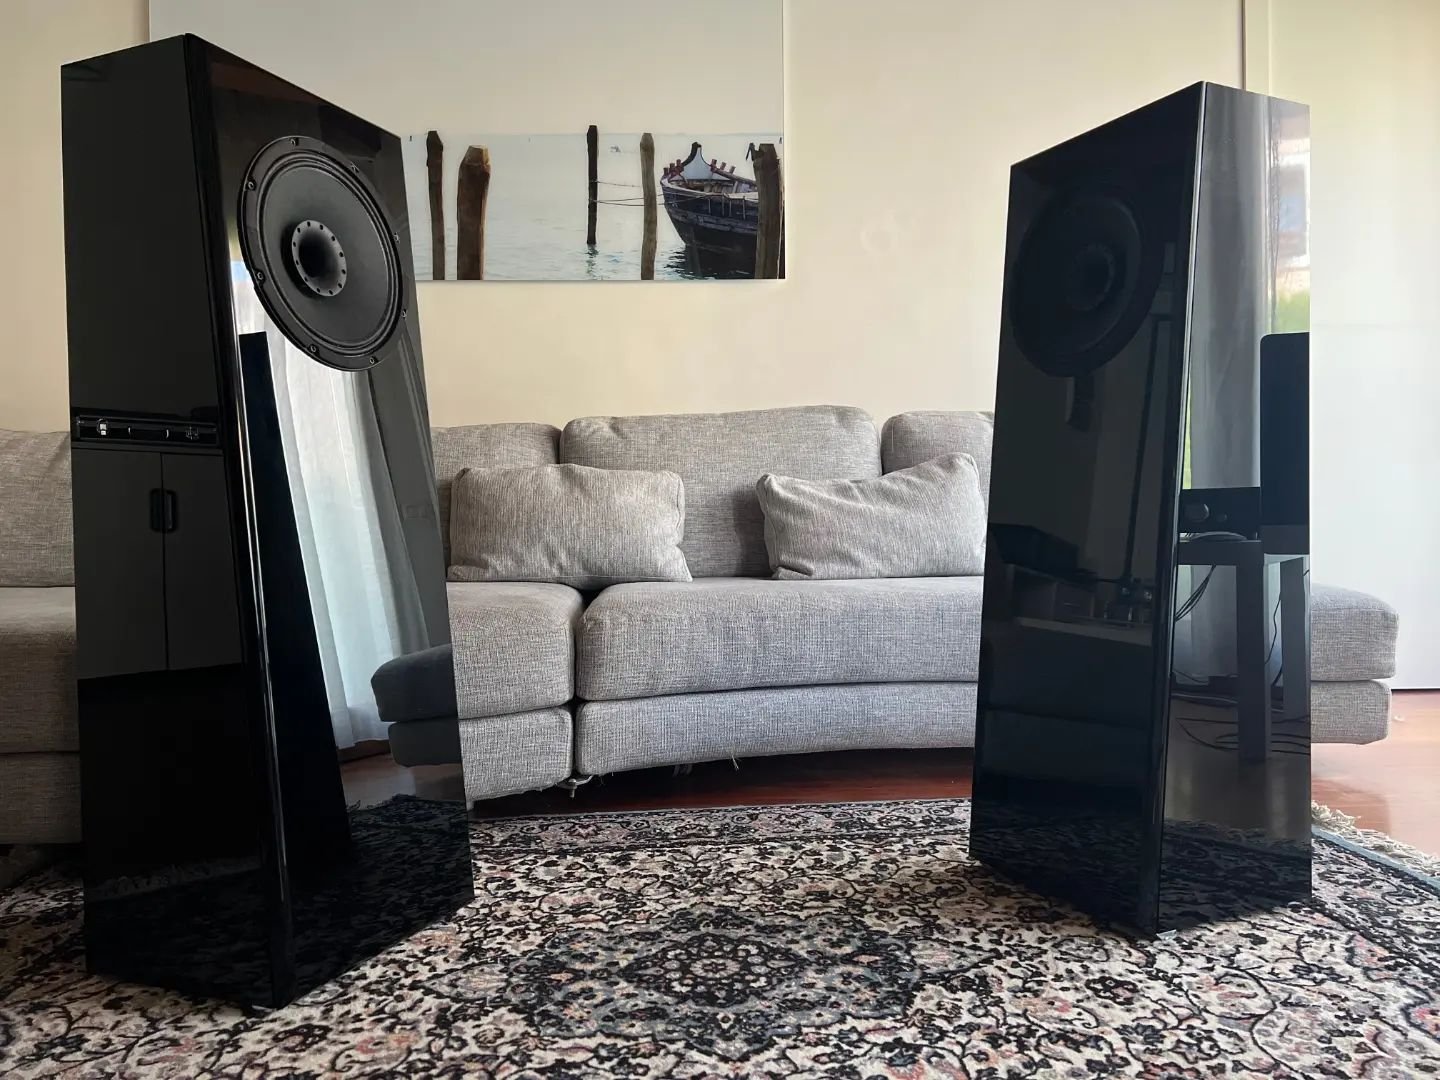 'Amber' source point loudspeakers featuring Waveglas construction and finish to perfectly match the partnering Maria 350 amplifier.

www.valhifi.co.uk

#danielhertz #marklevinson #audiophile #mightycatchip #cwave #hifi #hifilover #digitalaudio #dac #